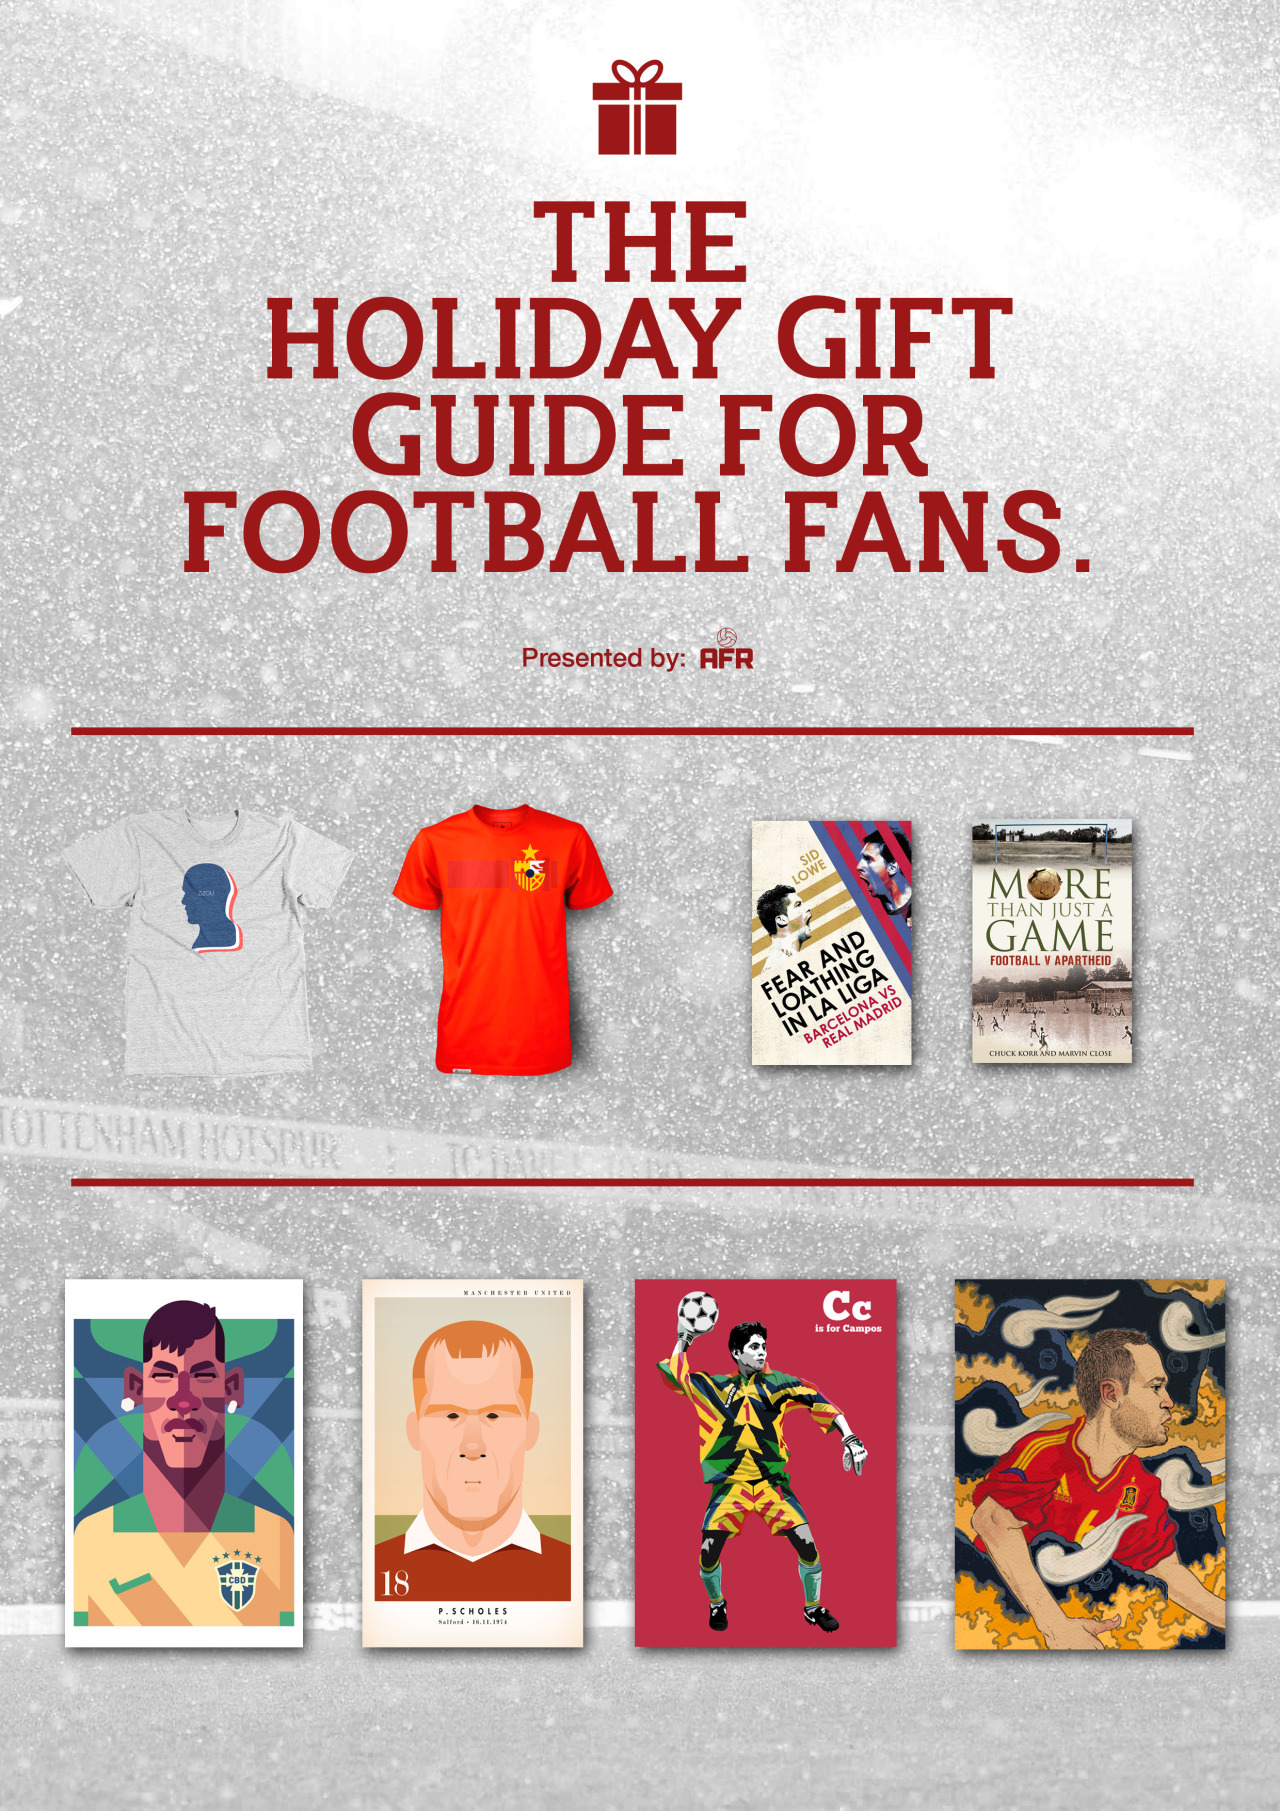 The Holiday Gift Guide for Football Fans If there’s anything we learned from Arsenal fans after Mesut Özil moved to North London, it’s that buying nice things is the key to happiness. With the holiday season fast approaching, we’re just days away...